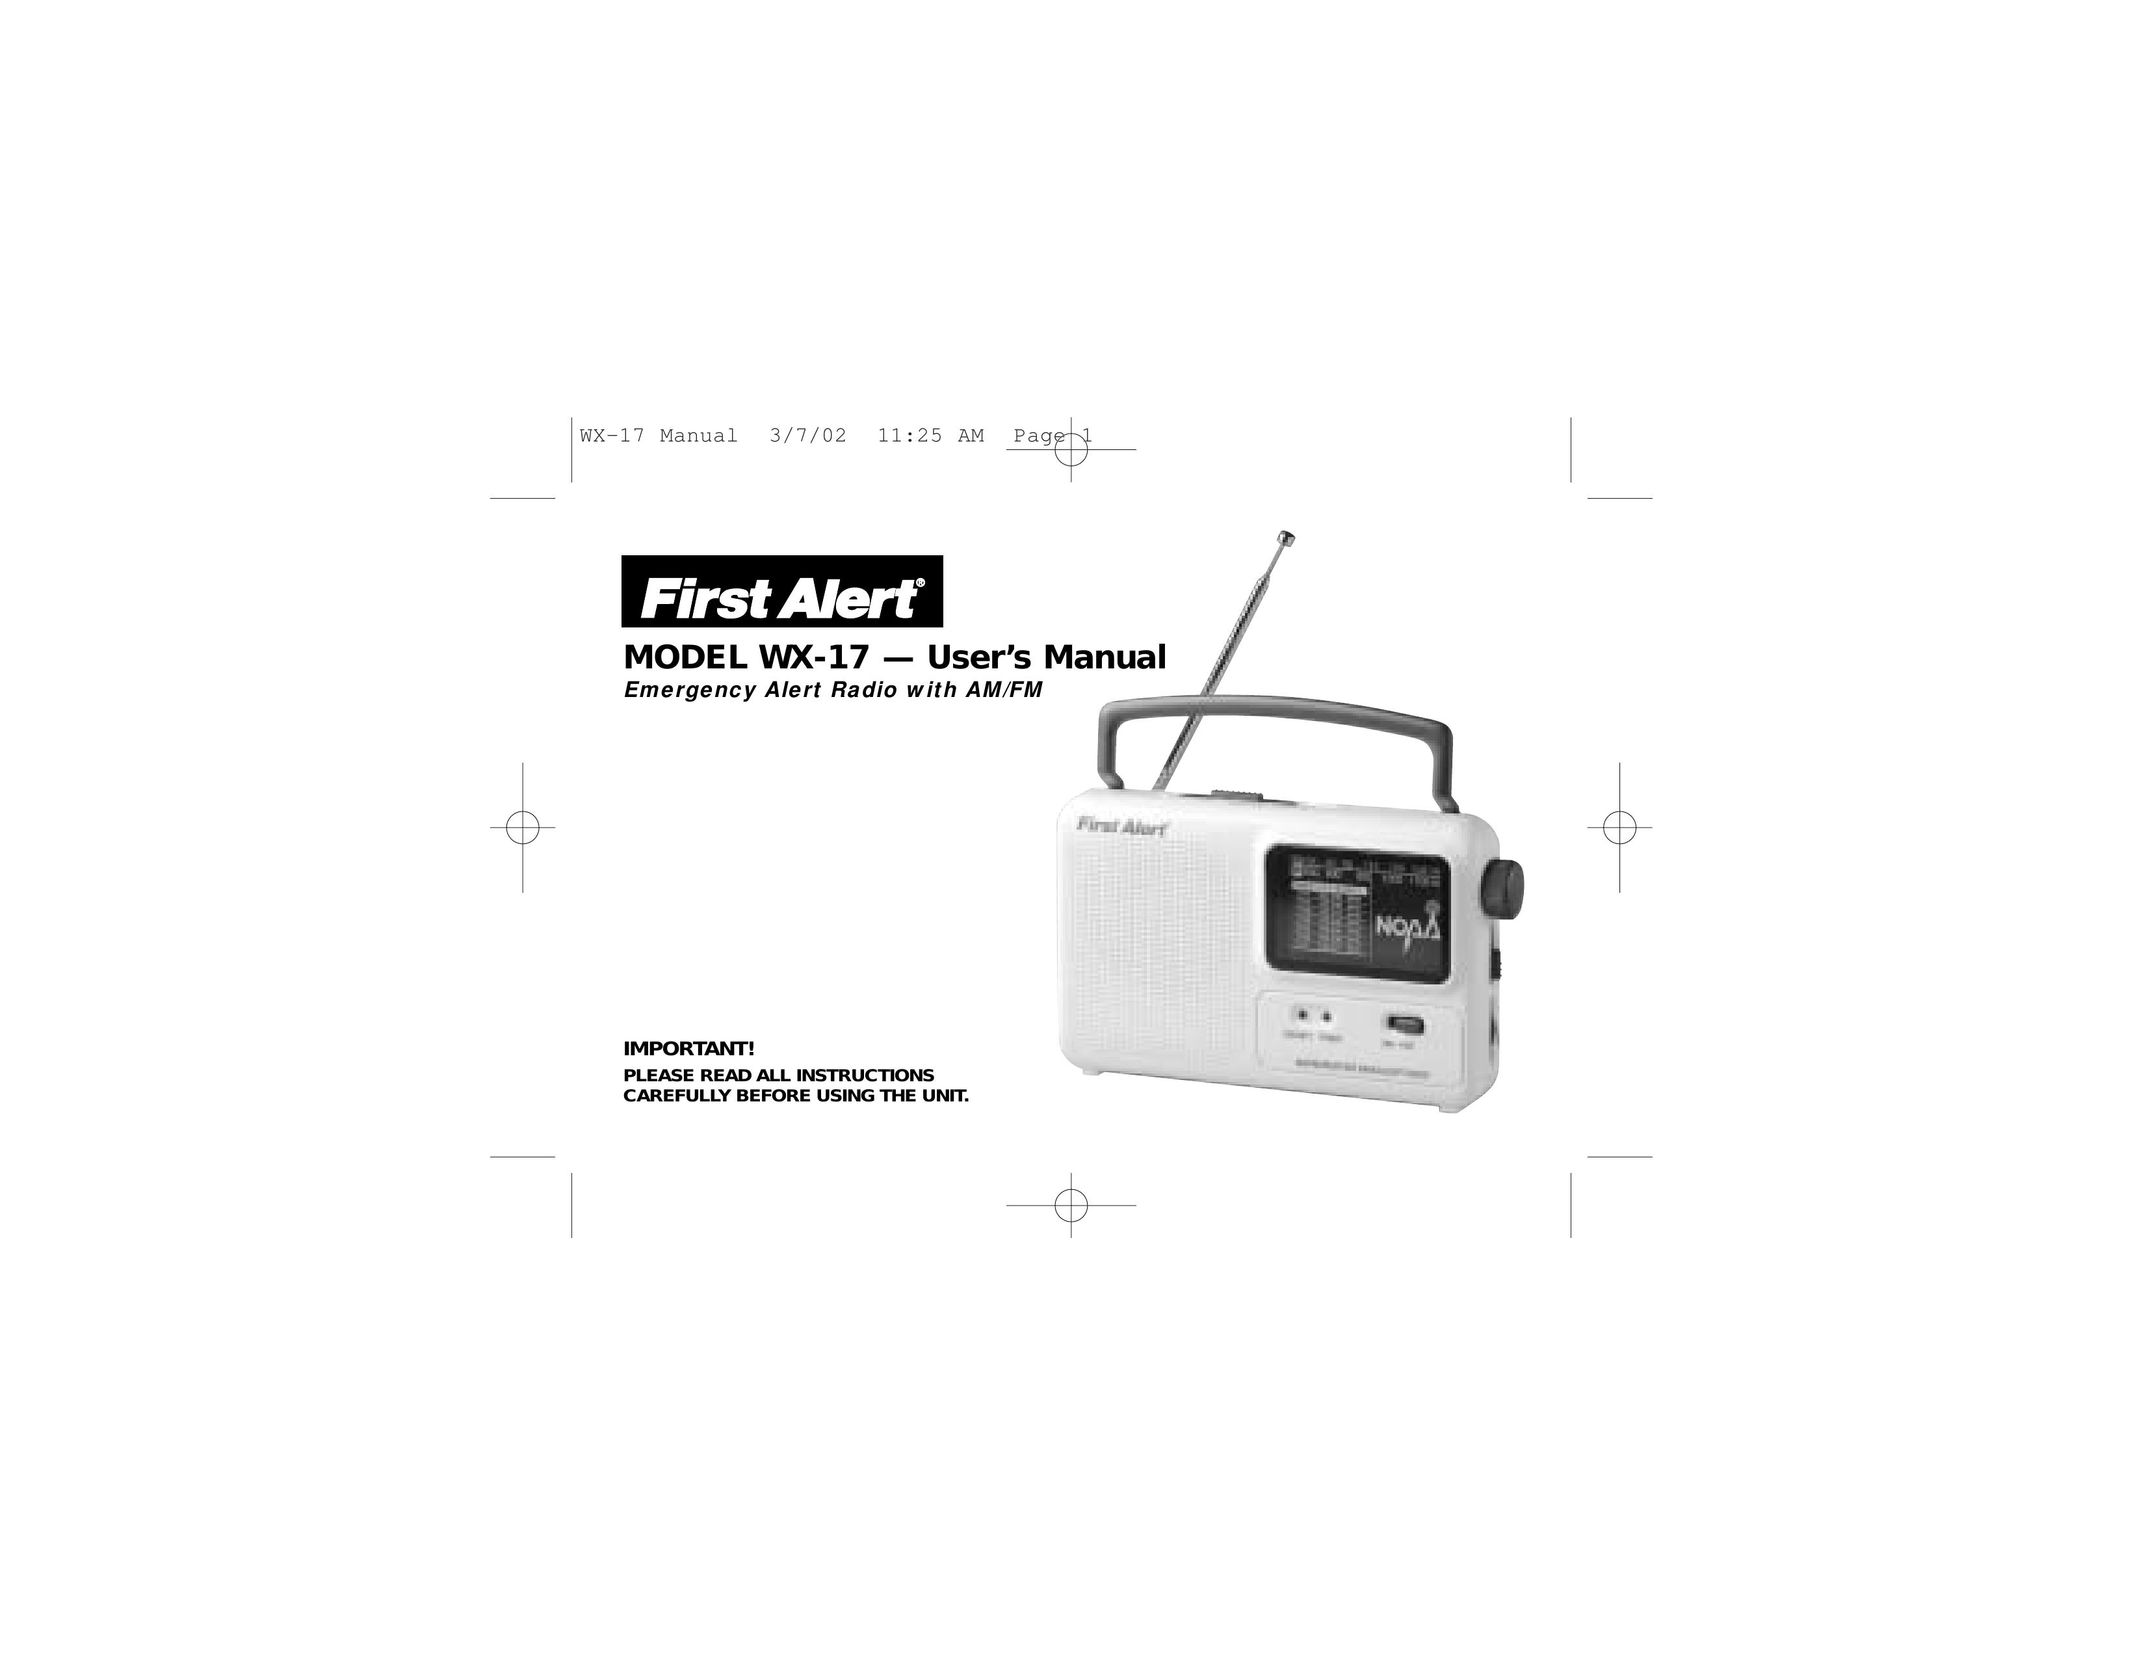 First Alert WX-17 Stereo System User Manual